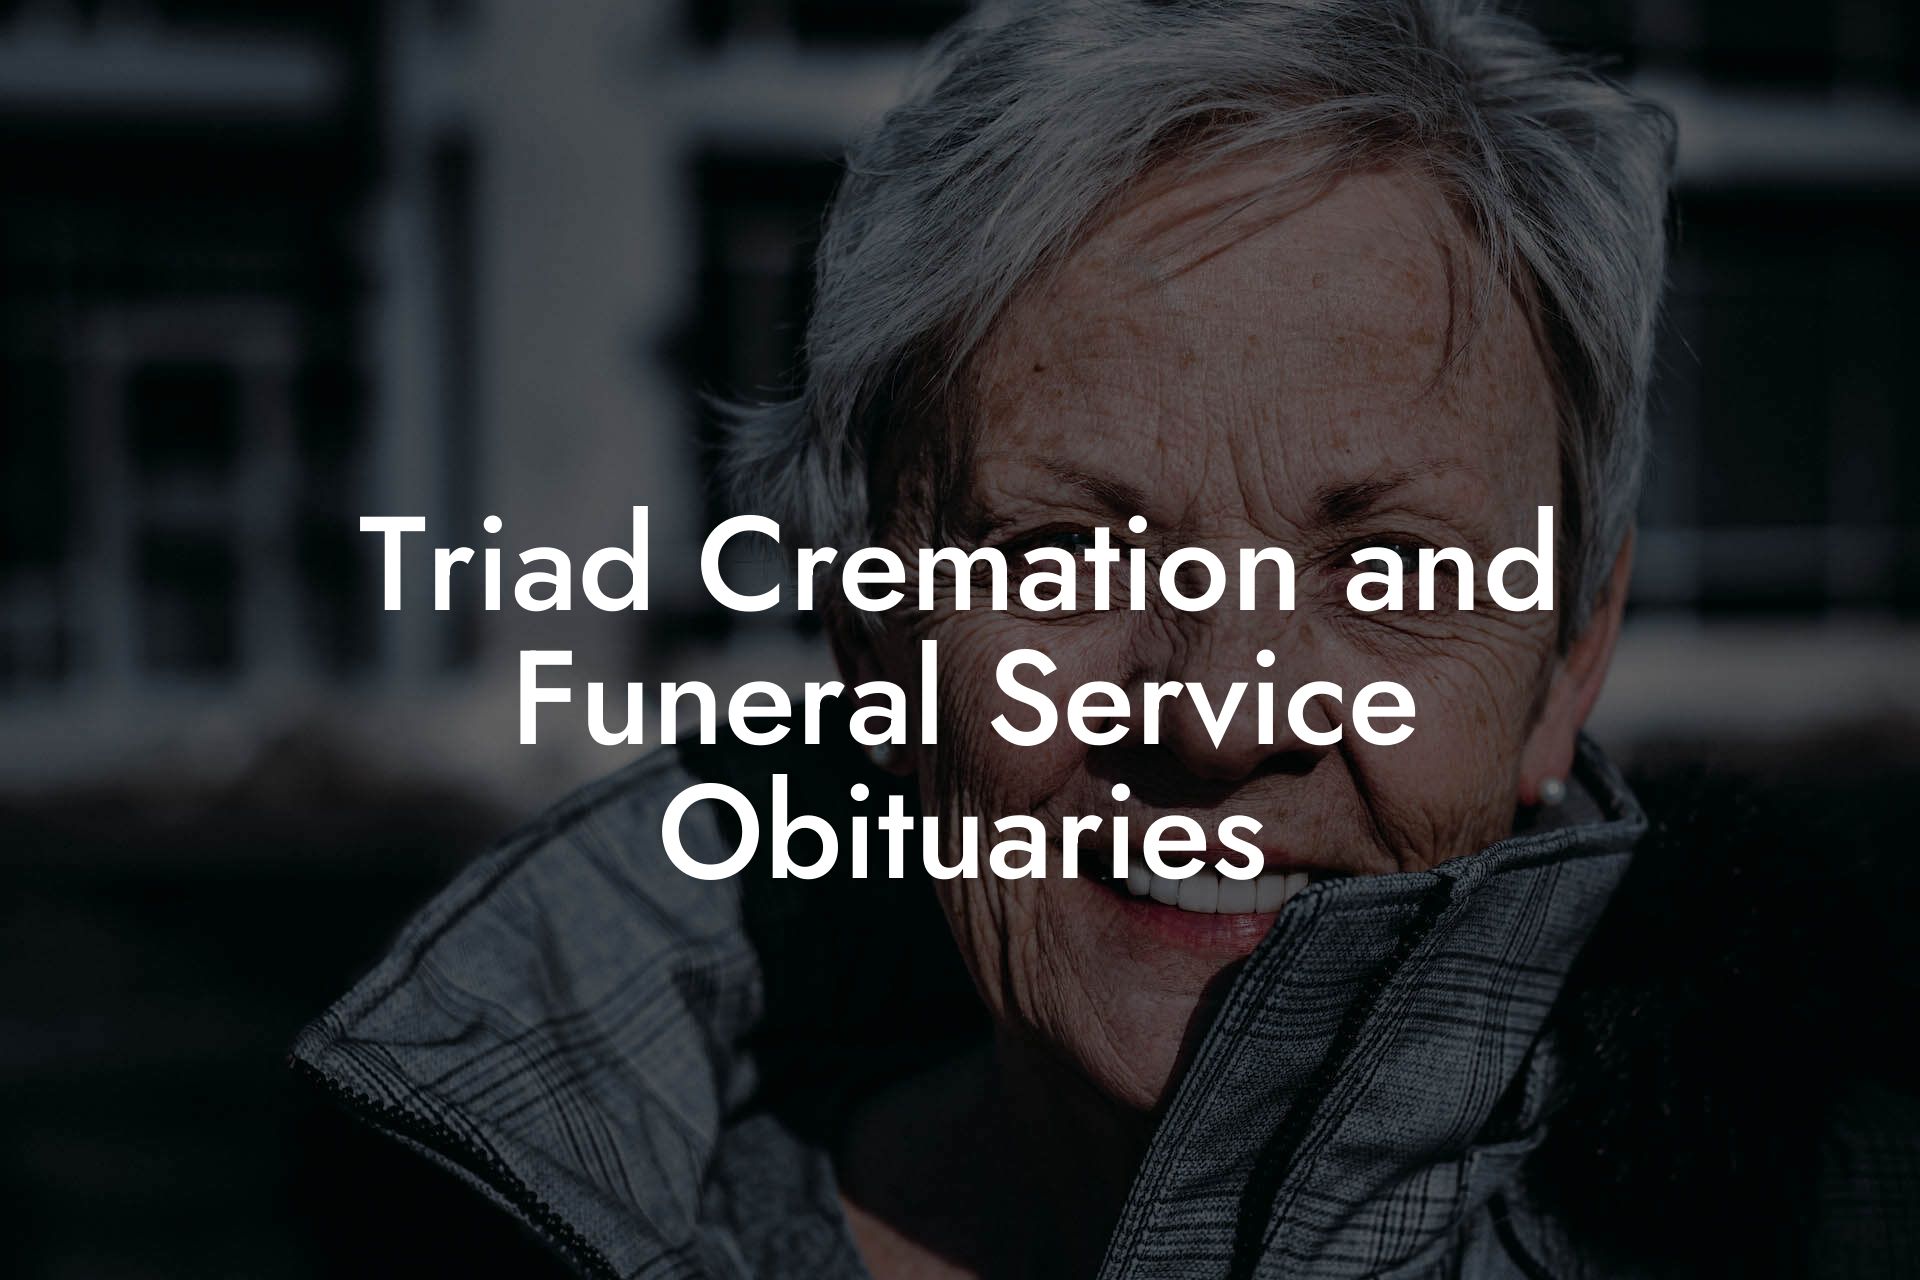 Triad Cremation and Funeral Service Obituaries - Eulogy Assistant